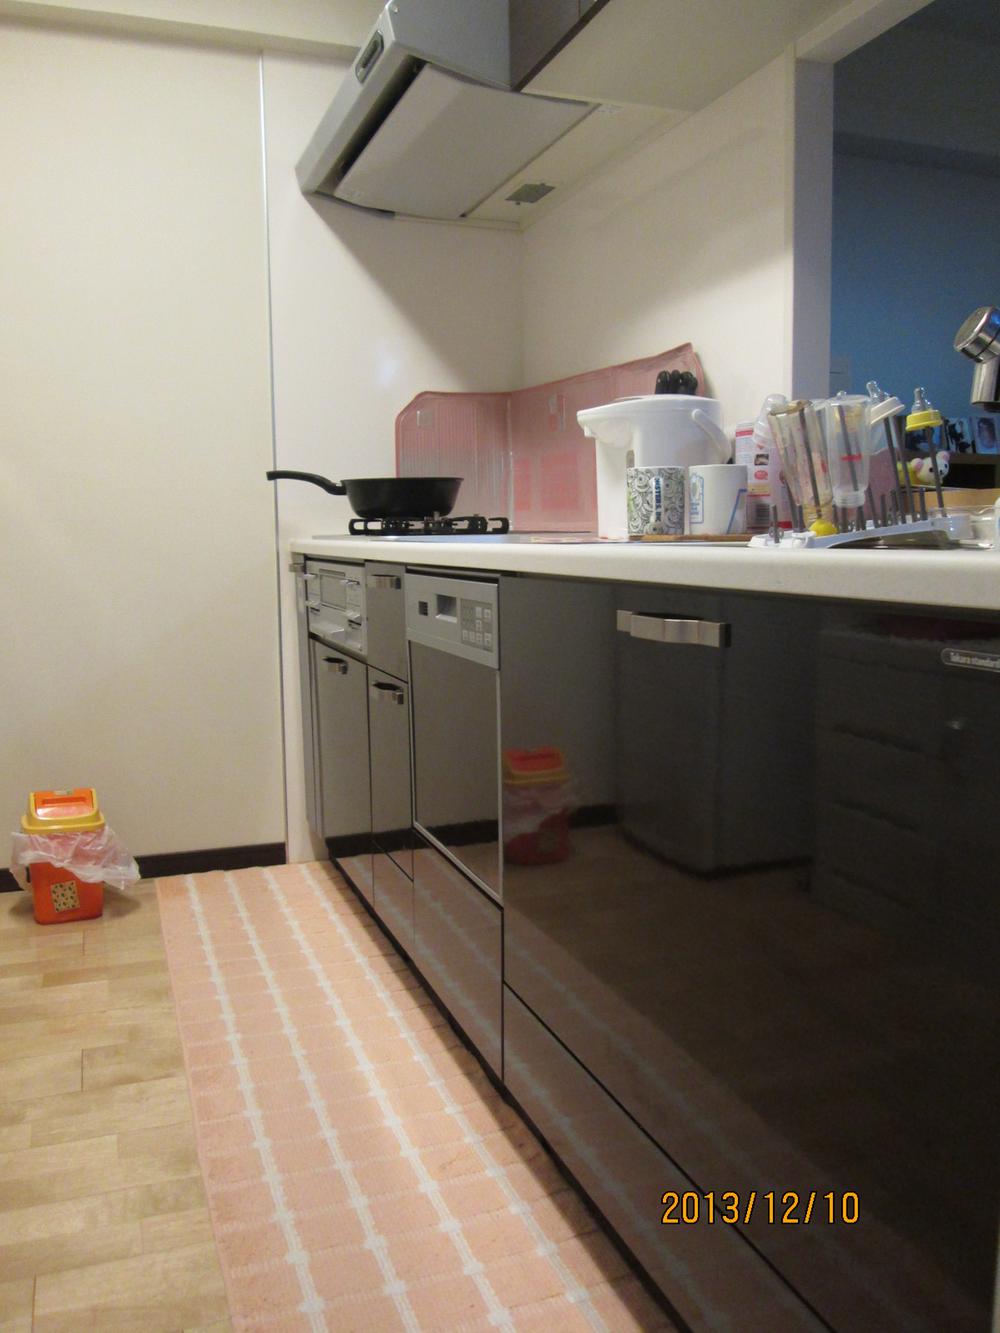 Kitchen. It is a system kitchen dishwasher with! It has been carefully use!